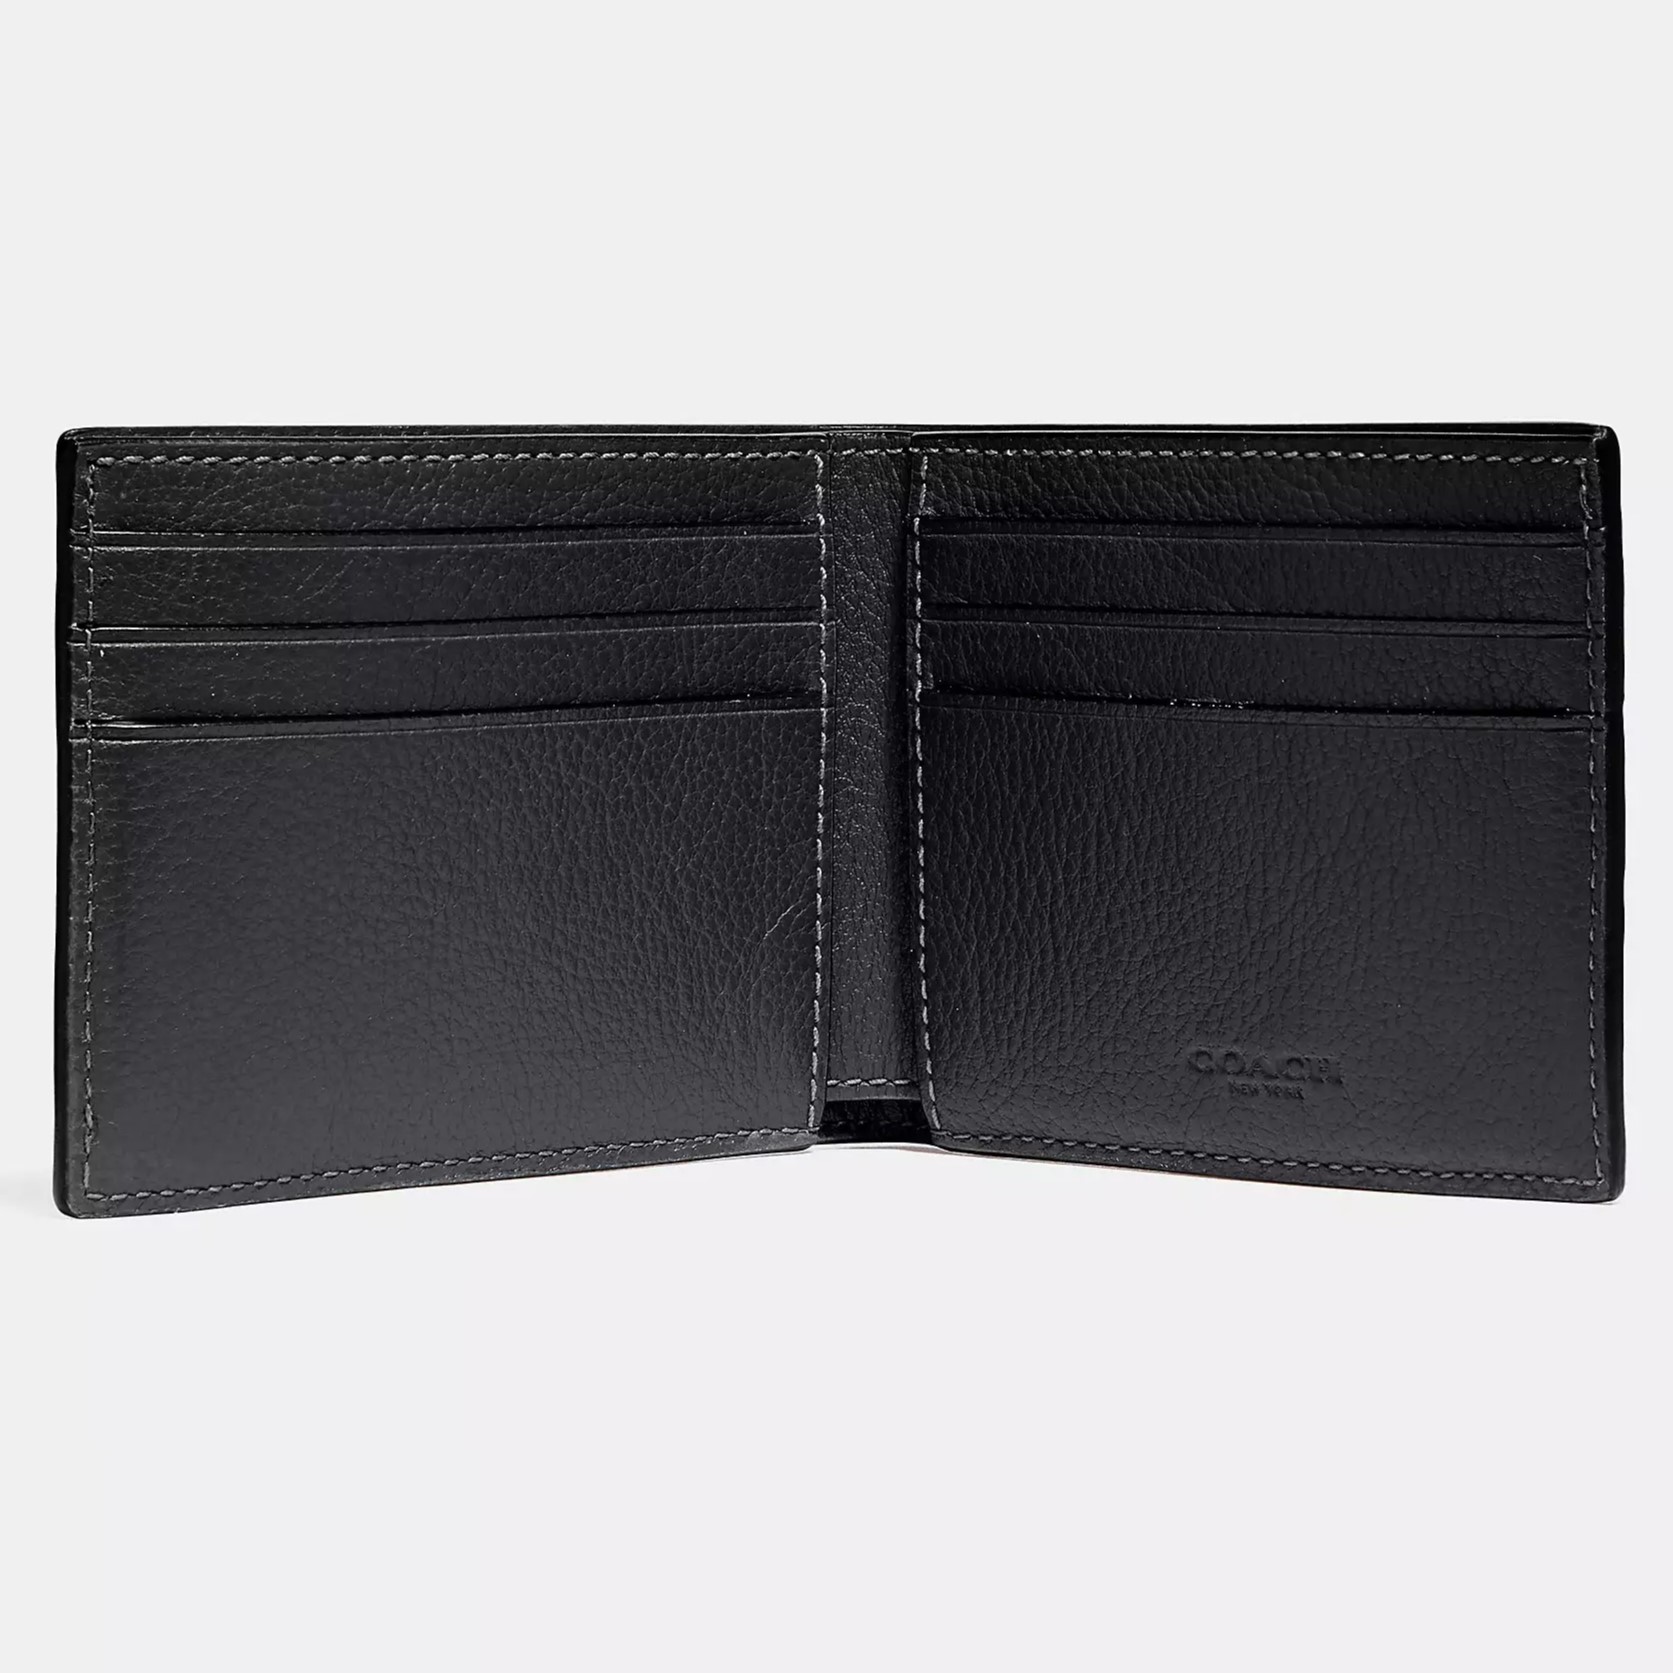 VÍ COACH NAM NGẮN SỌC GIỮA SLIM BILLFOLD WALLET WITH VARSITY STRIPE SMOOTH CALF LEATHER F26171 1